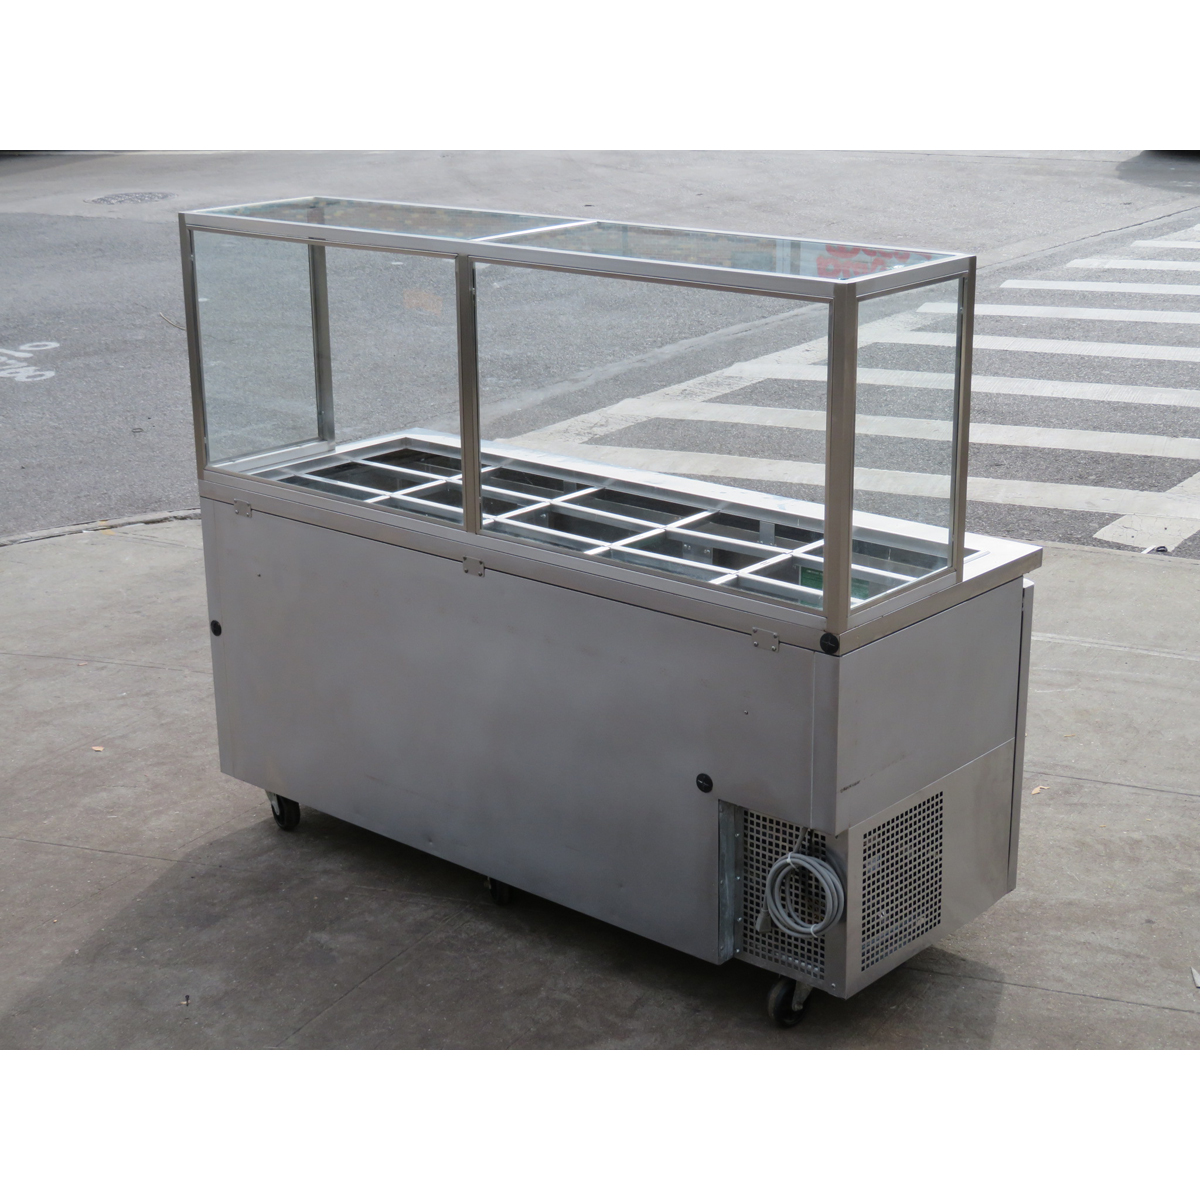 Turbo Air JBT-72 Refrigerated Salad Bar with Custom Enclosed Sneeze Guard, Used Great Condition image 7